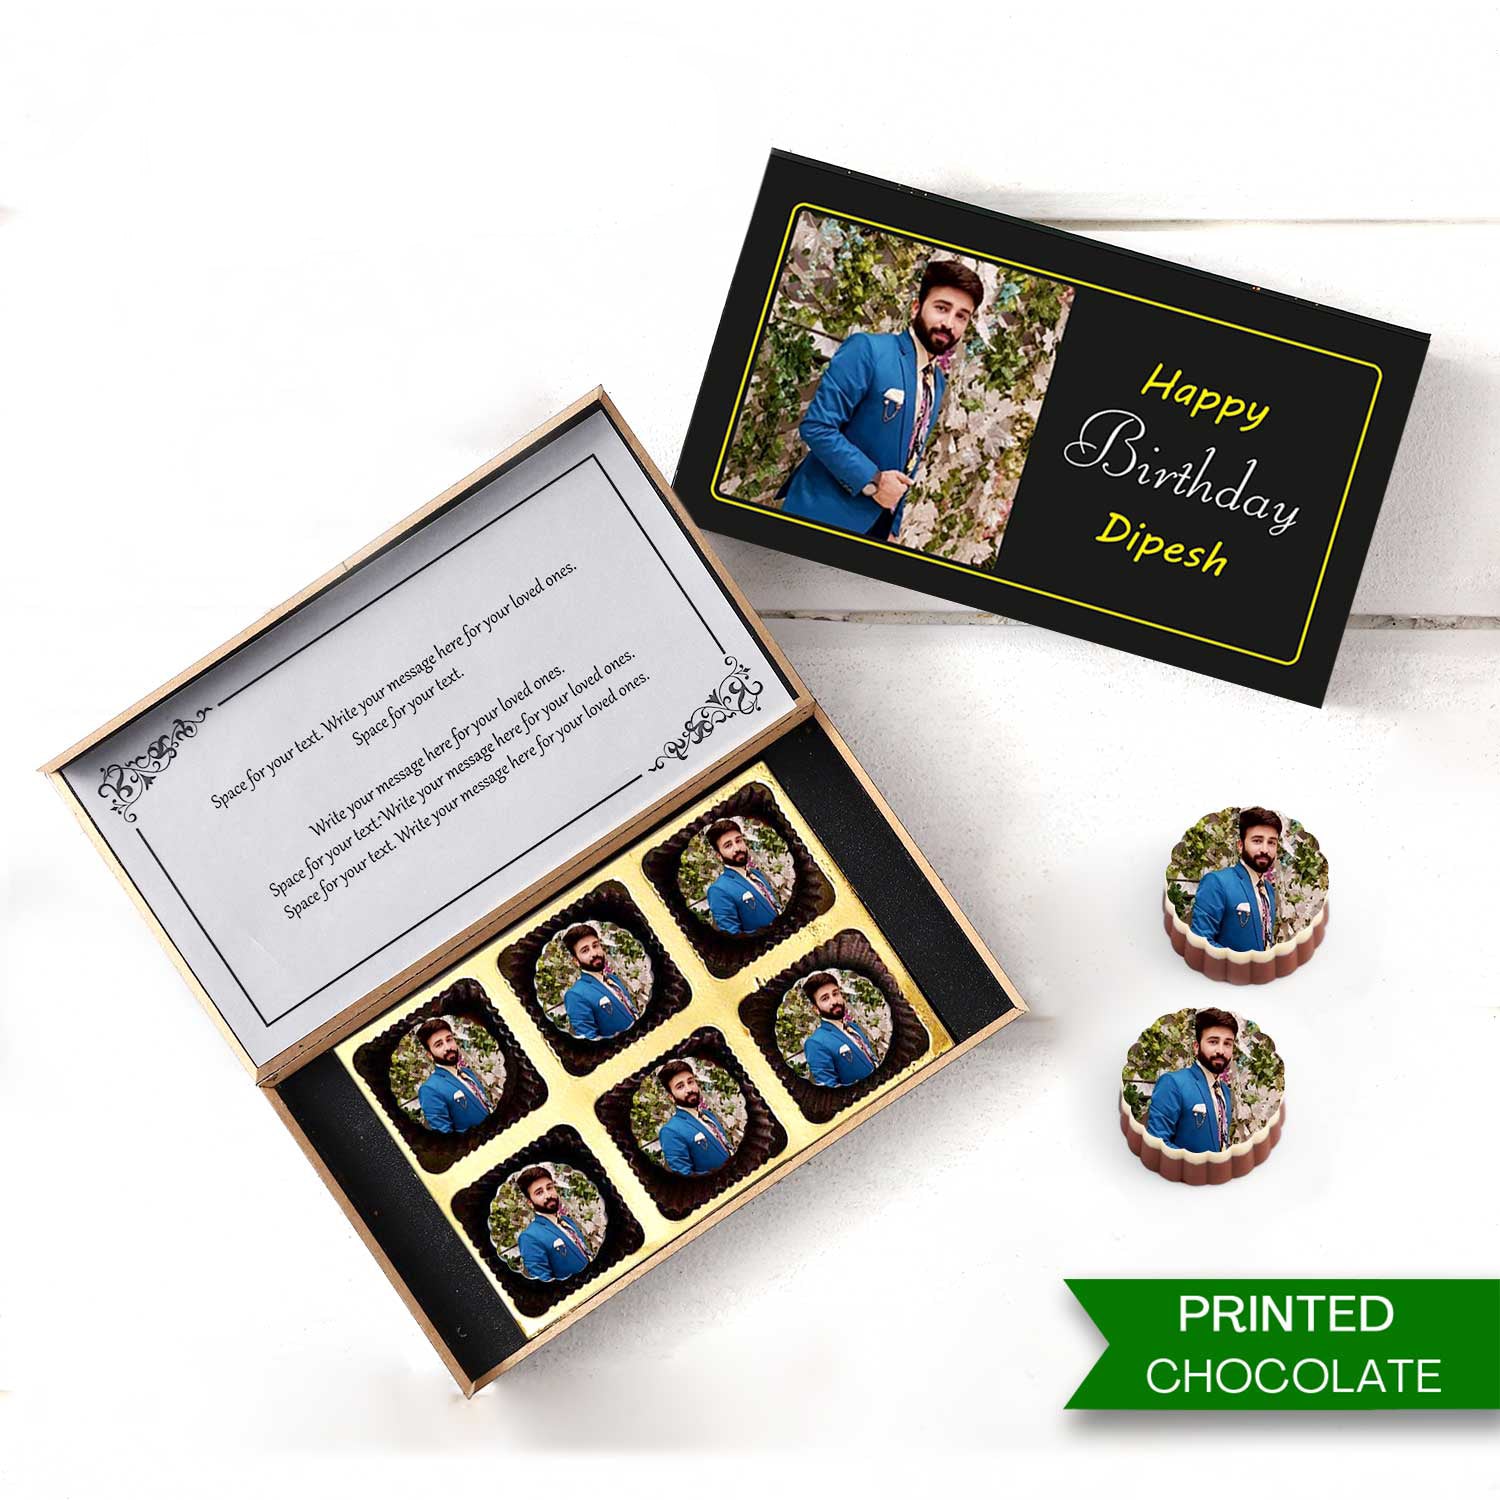 Personalised Chocolates for Personal and Professional Gifts